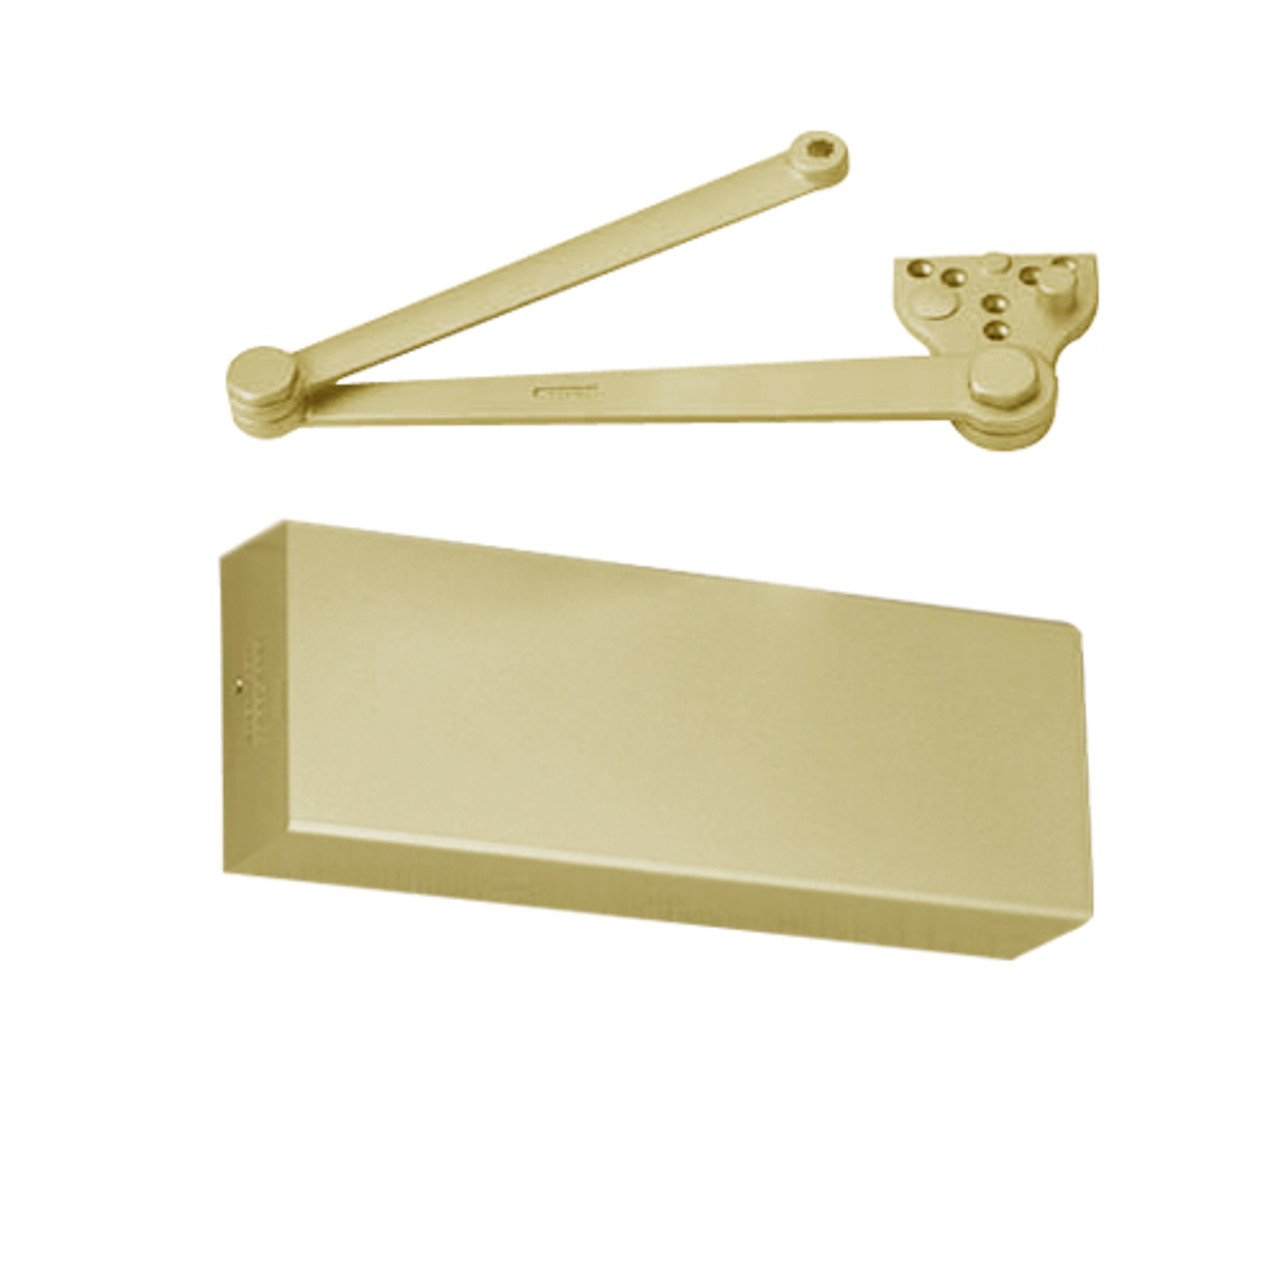 CLP9500-696 Norton 9500 Series Non-Hold Open Cast Iron Door Closer with CloserPlus Arm in Gold Finish